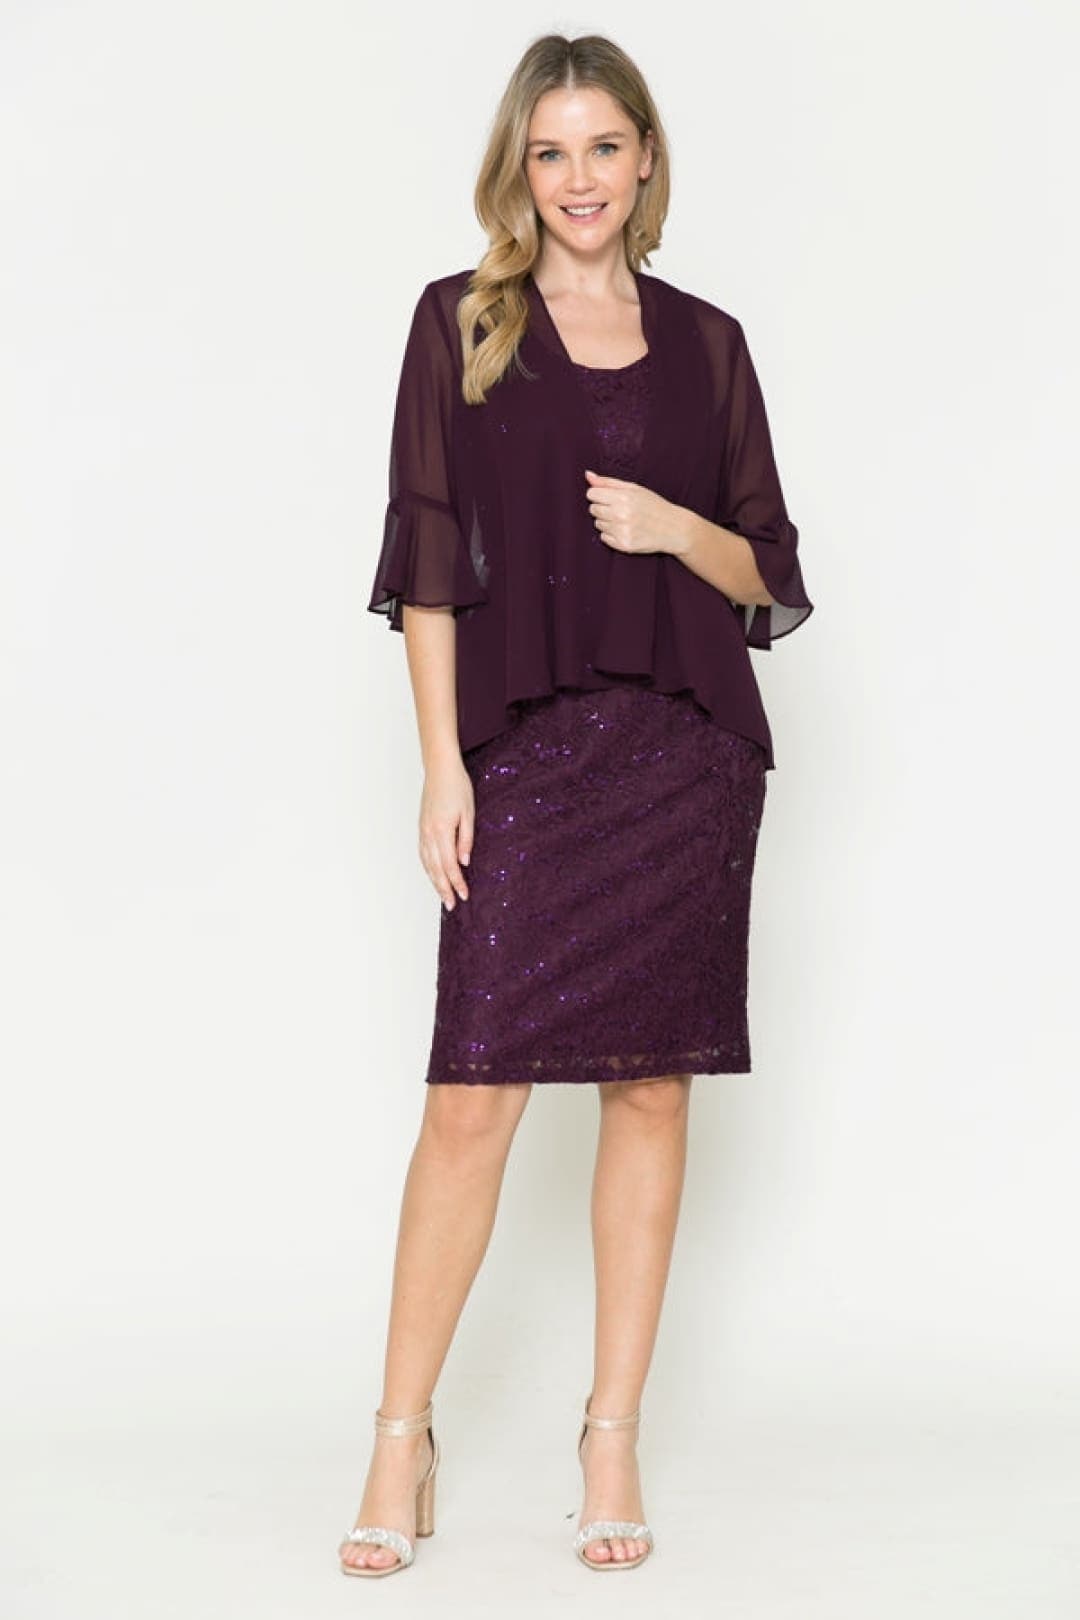 Plus Size Dress For Mother of the Bride - PLUM / M